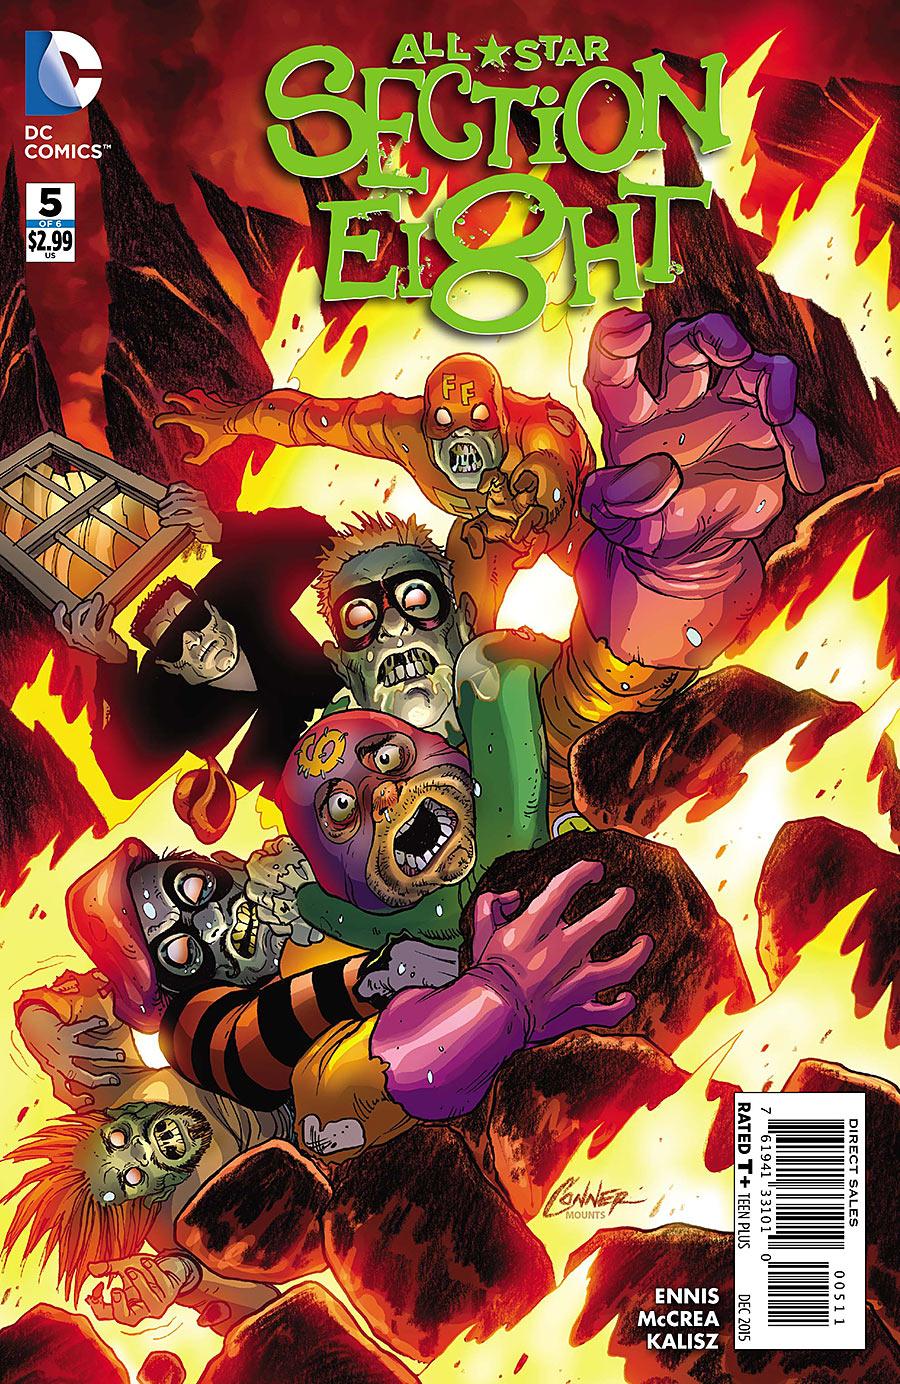 All Star Section Eight Vol. 1 #5